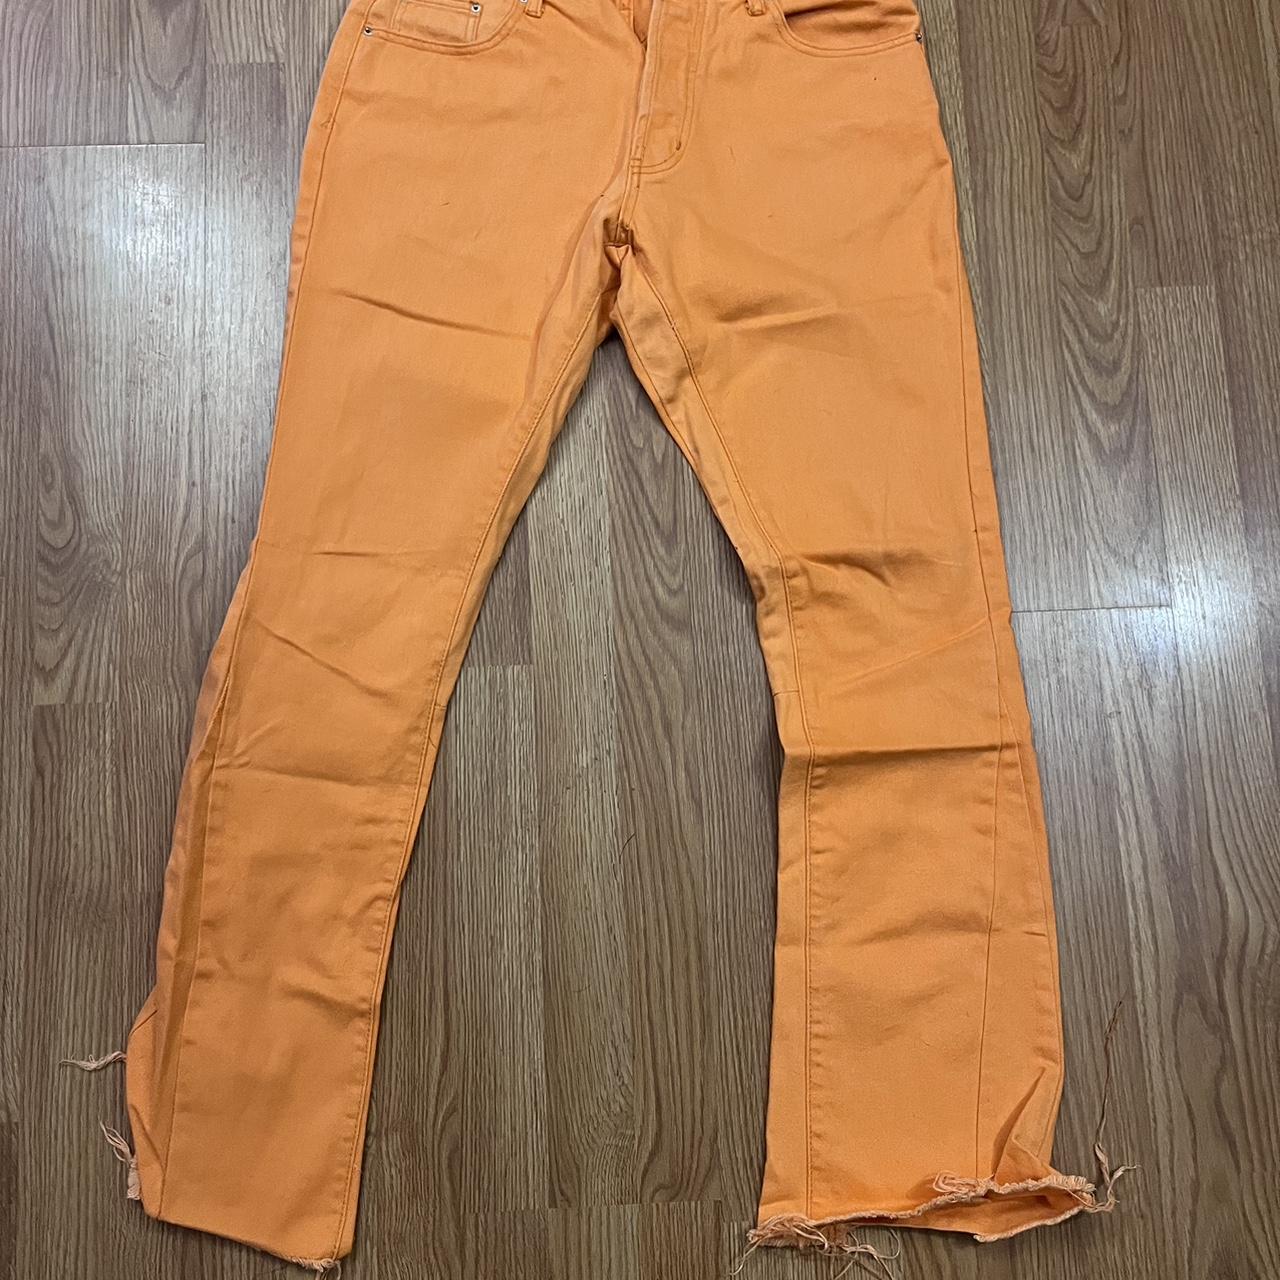 Vintage 90s Faded Orange Mens Jeans Waist Size 28 in XS - Etsy